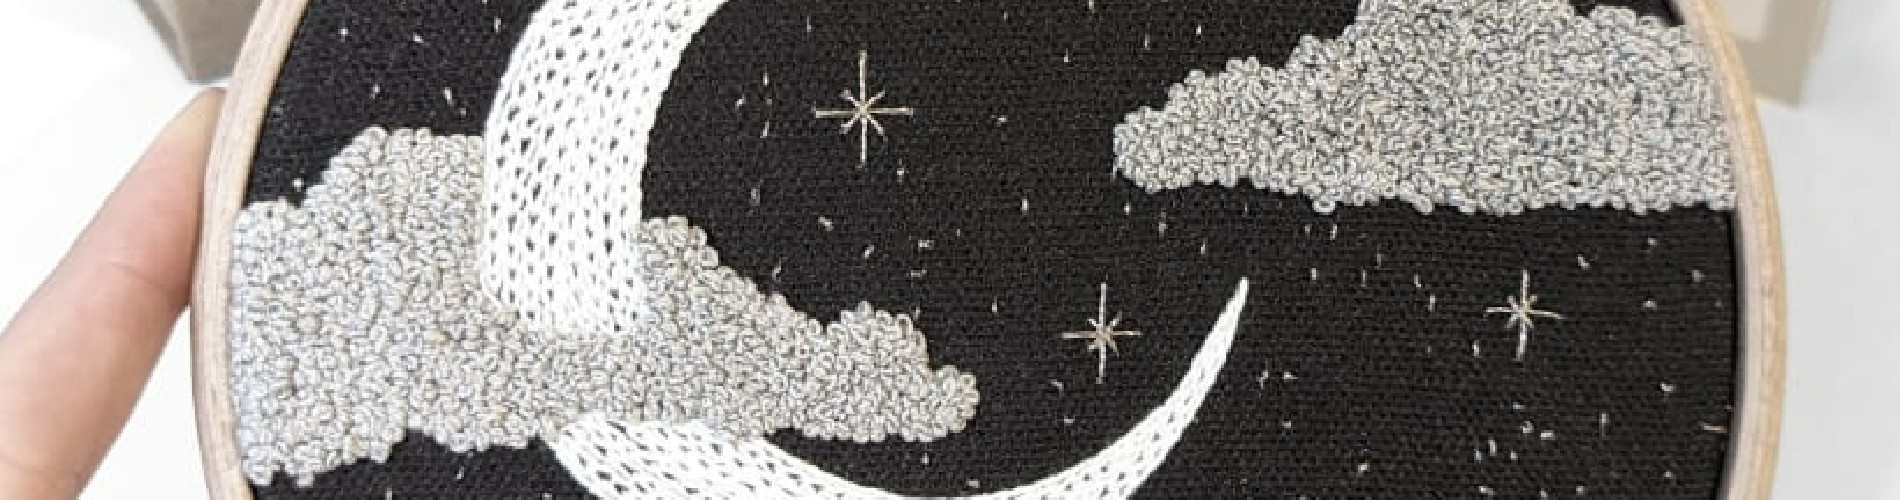 SoLo embroidery 1900x500.jpg